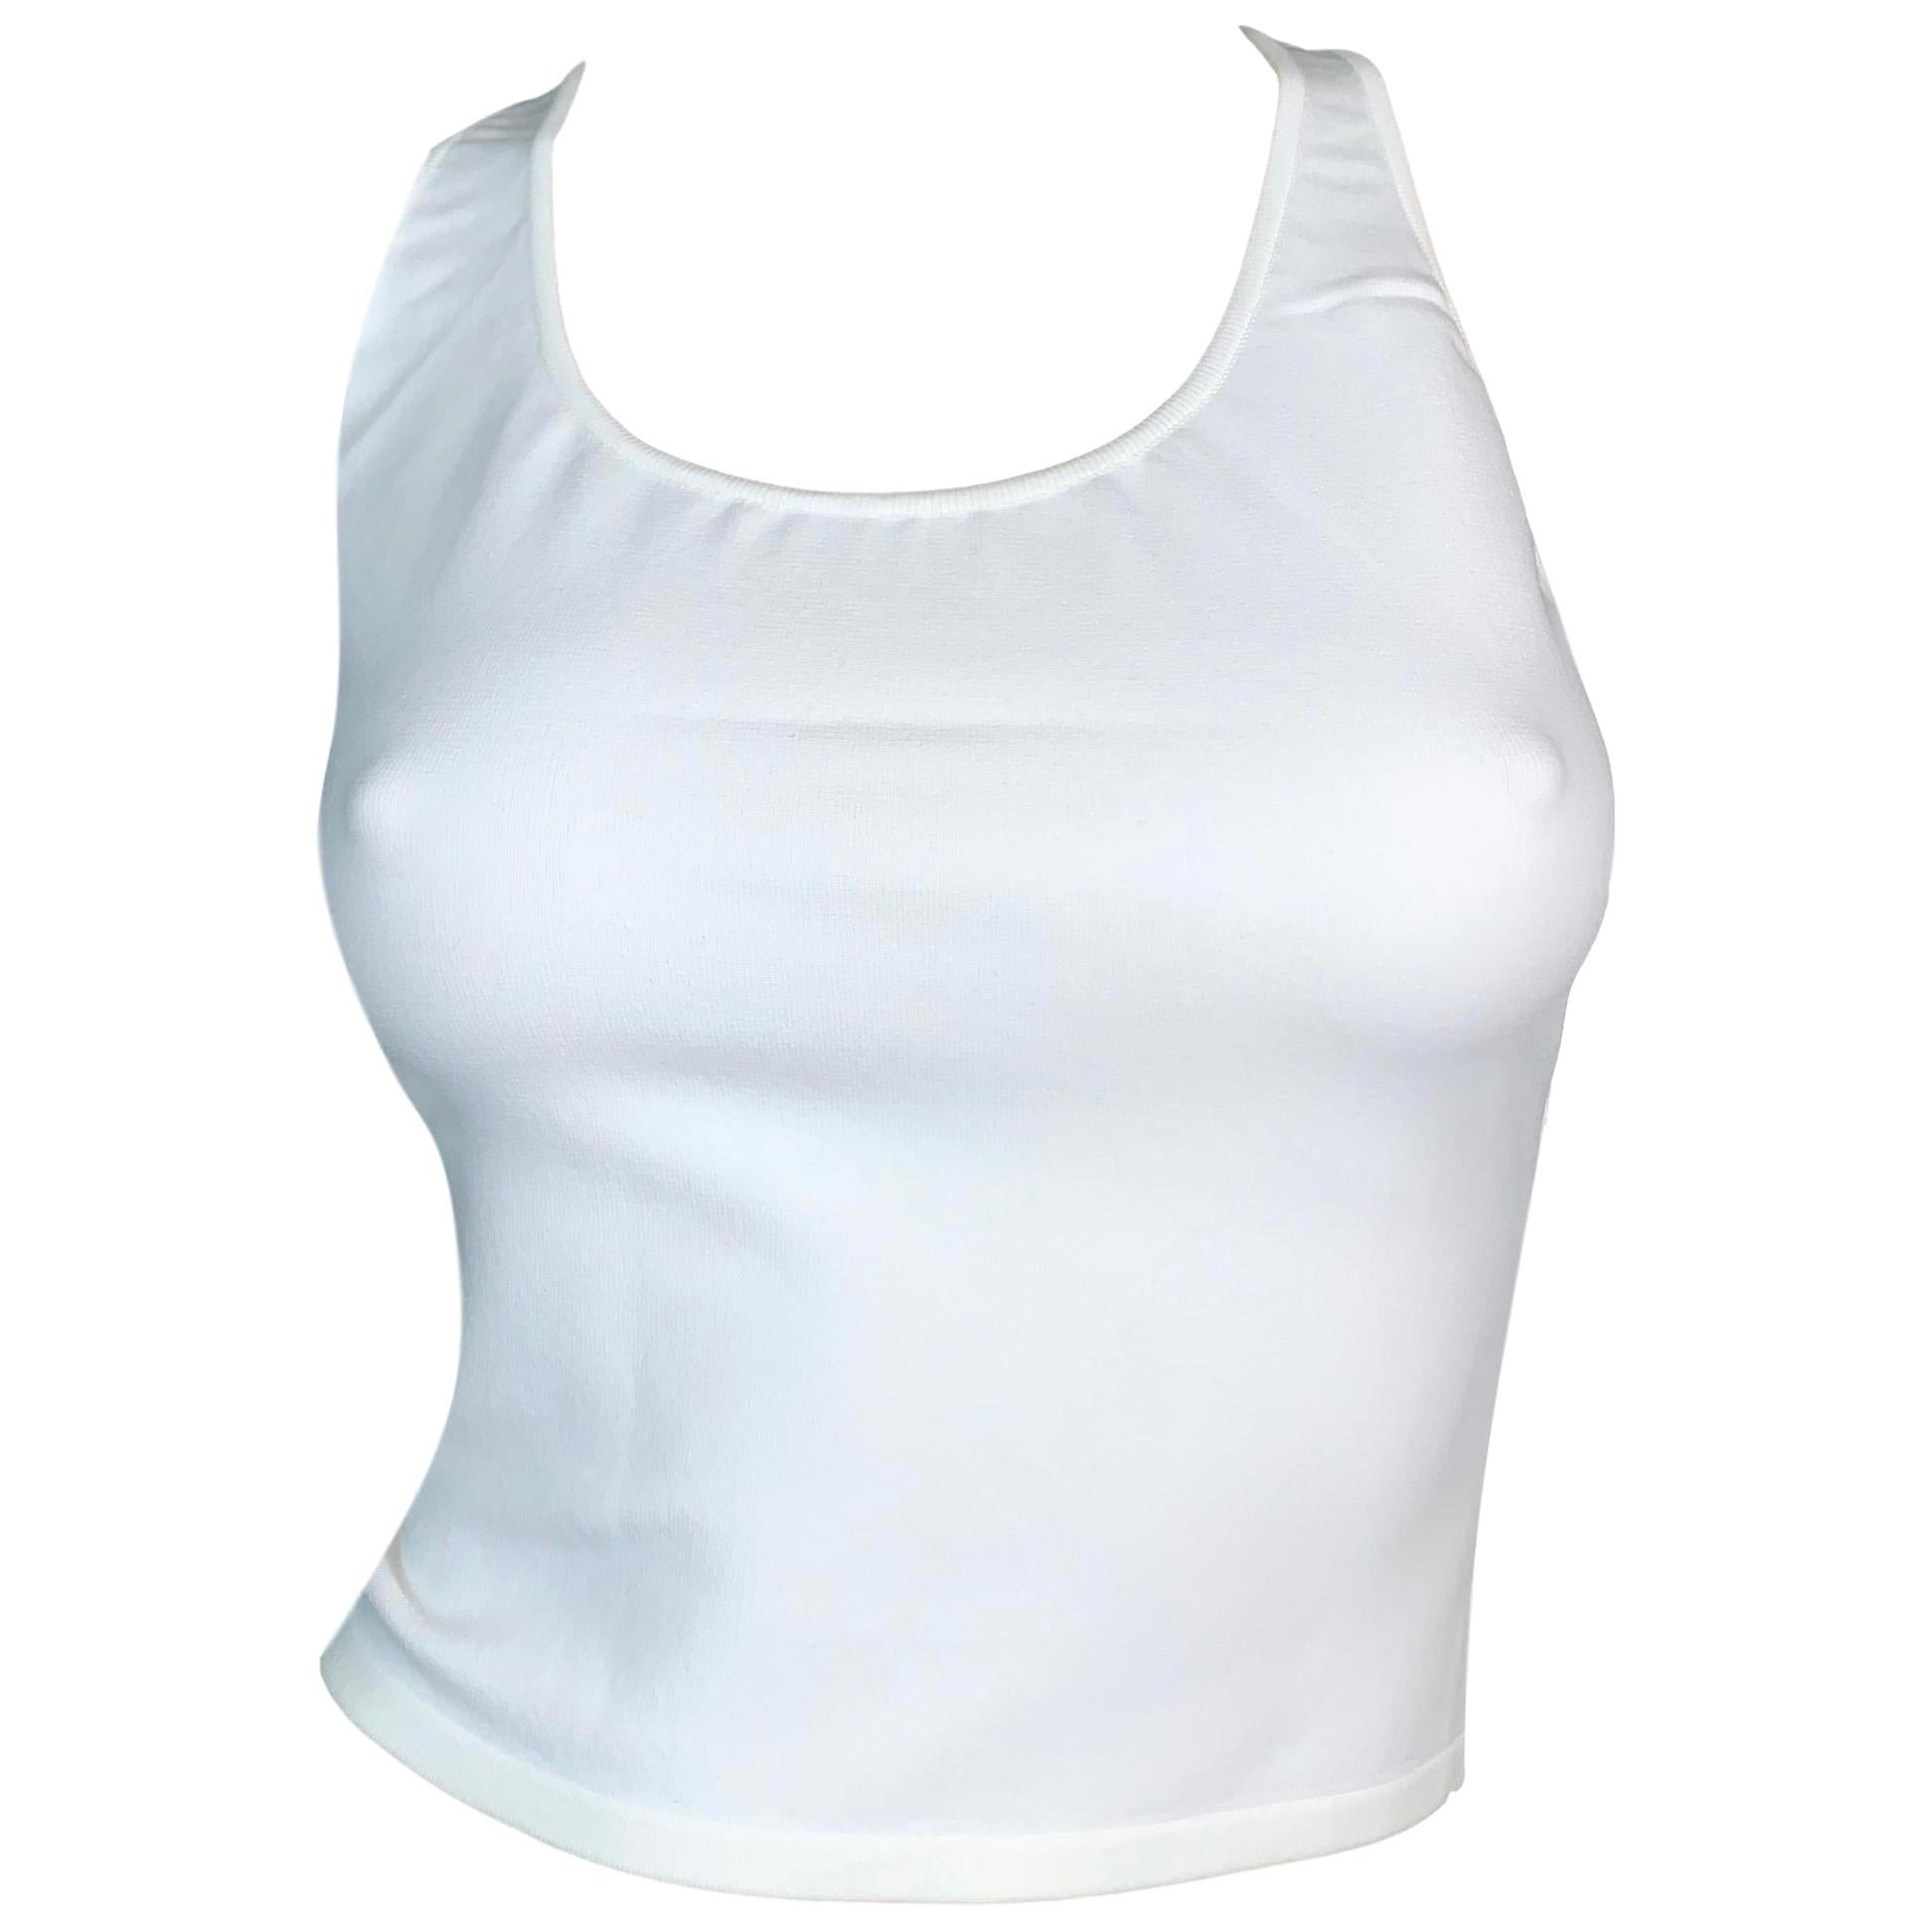 NWT 2000's Celine by Michael Kors White Bandage Stretch Crop Top